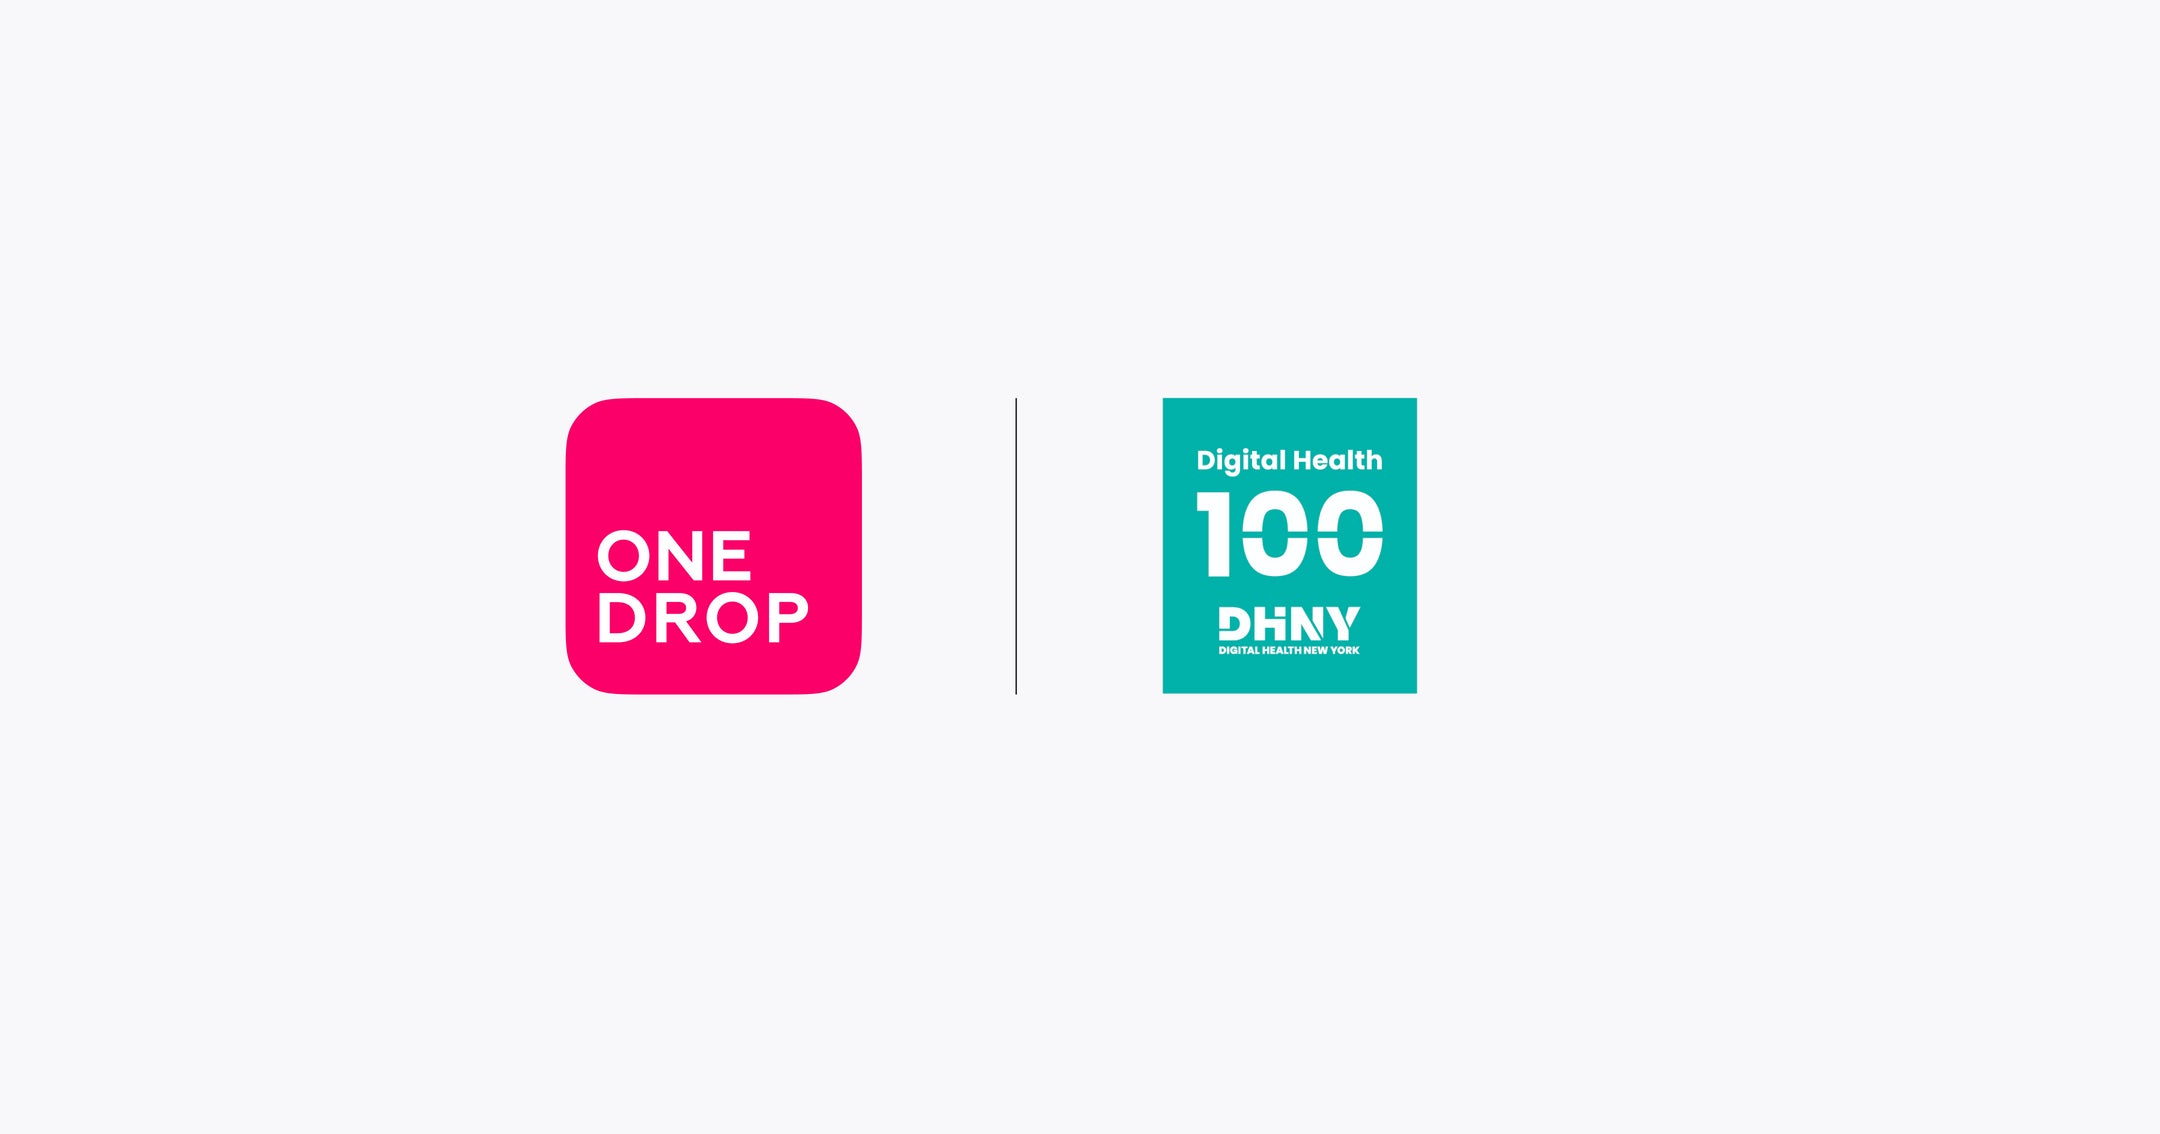 One Drop Named to the New York Digital Health 100